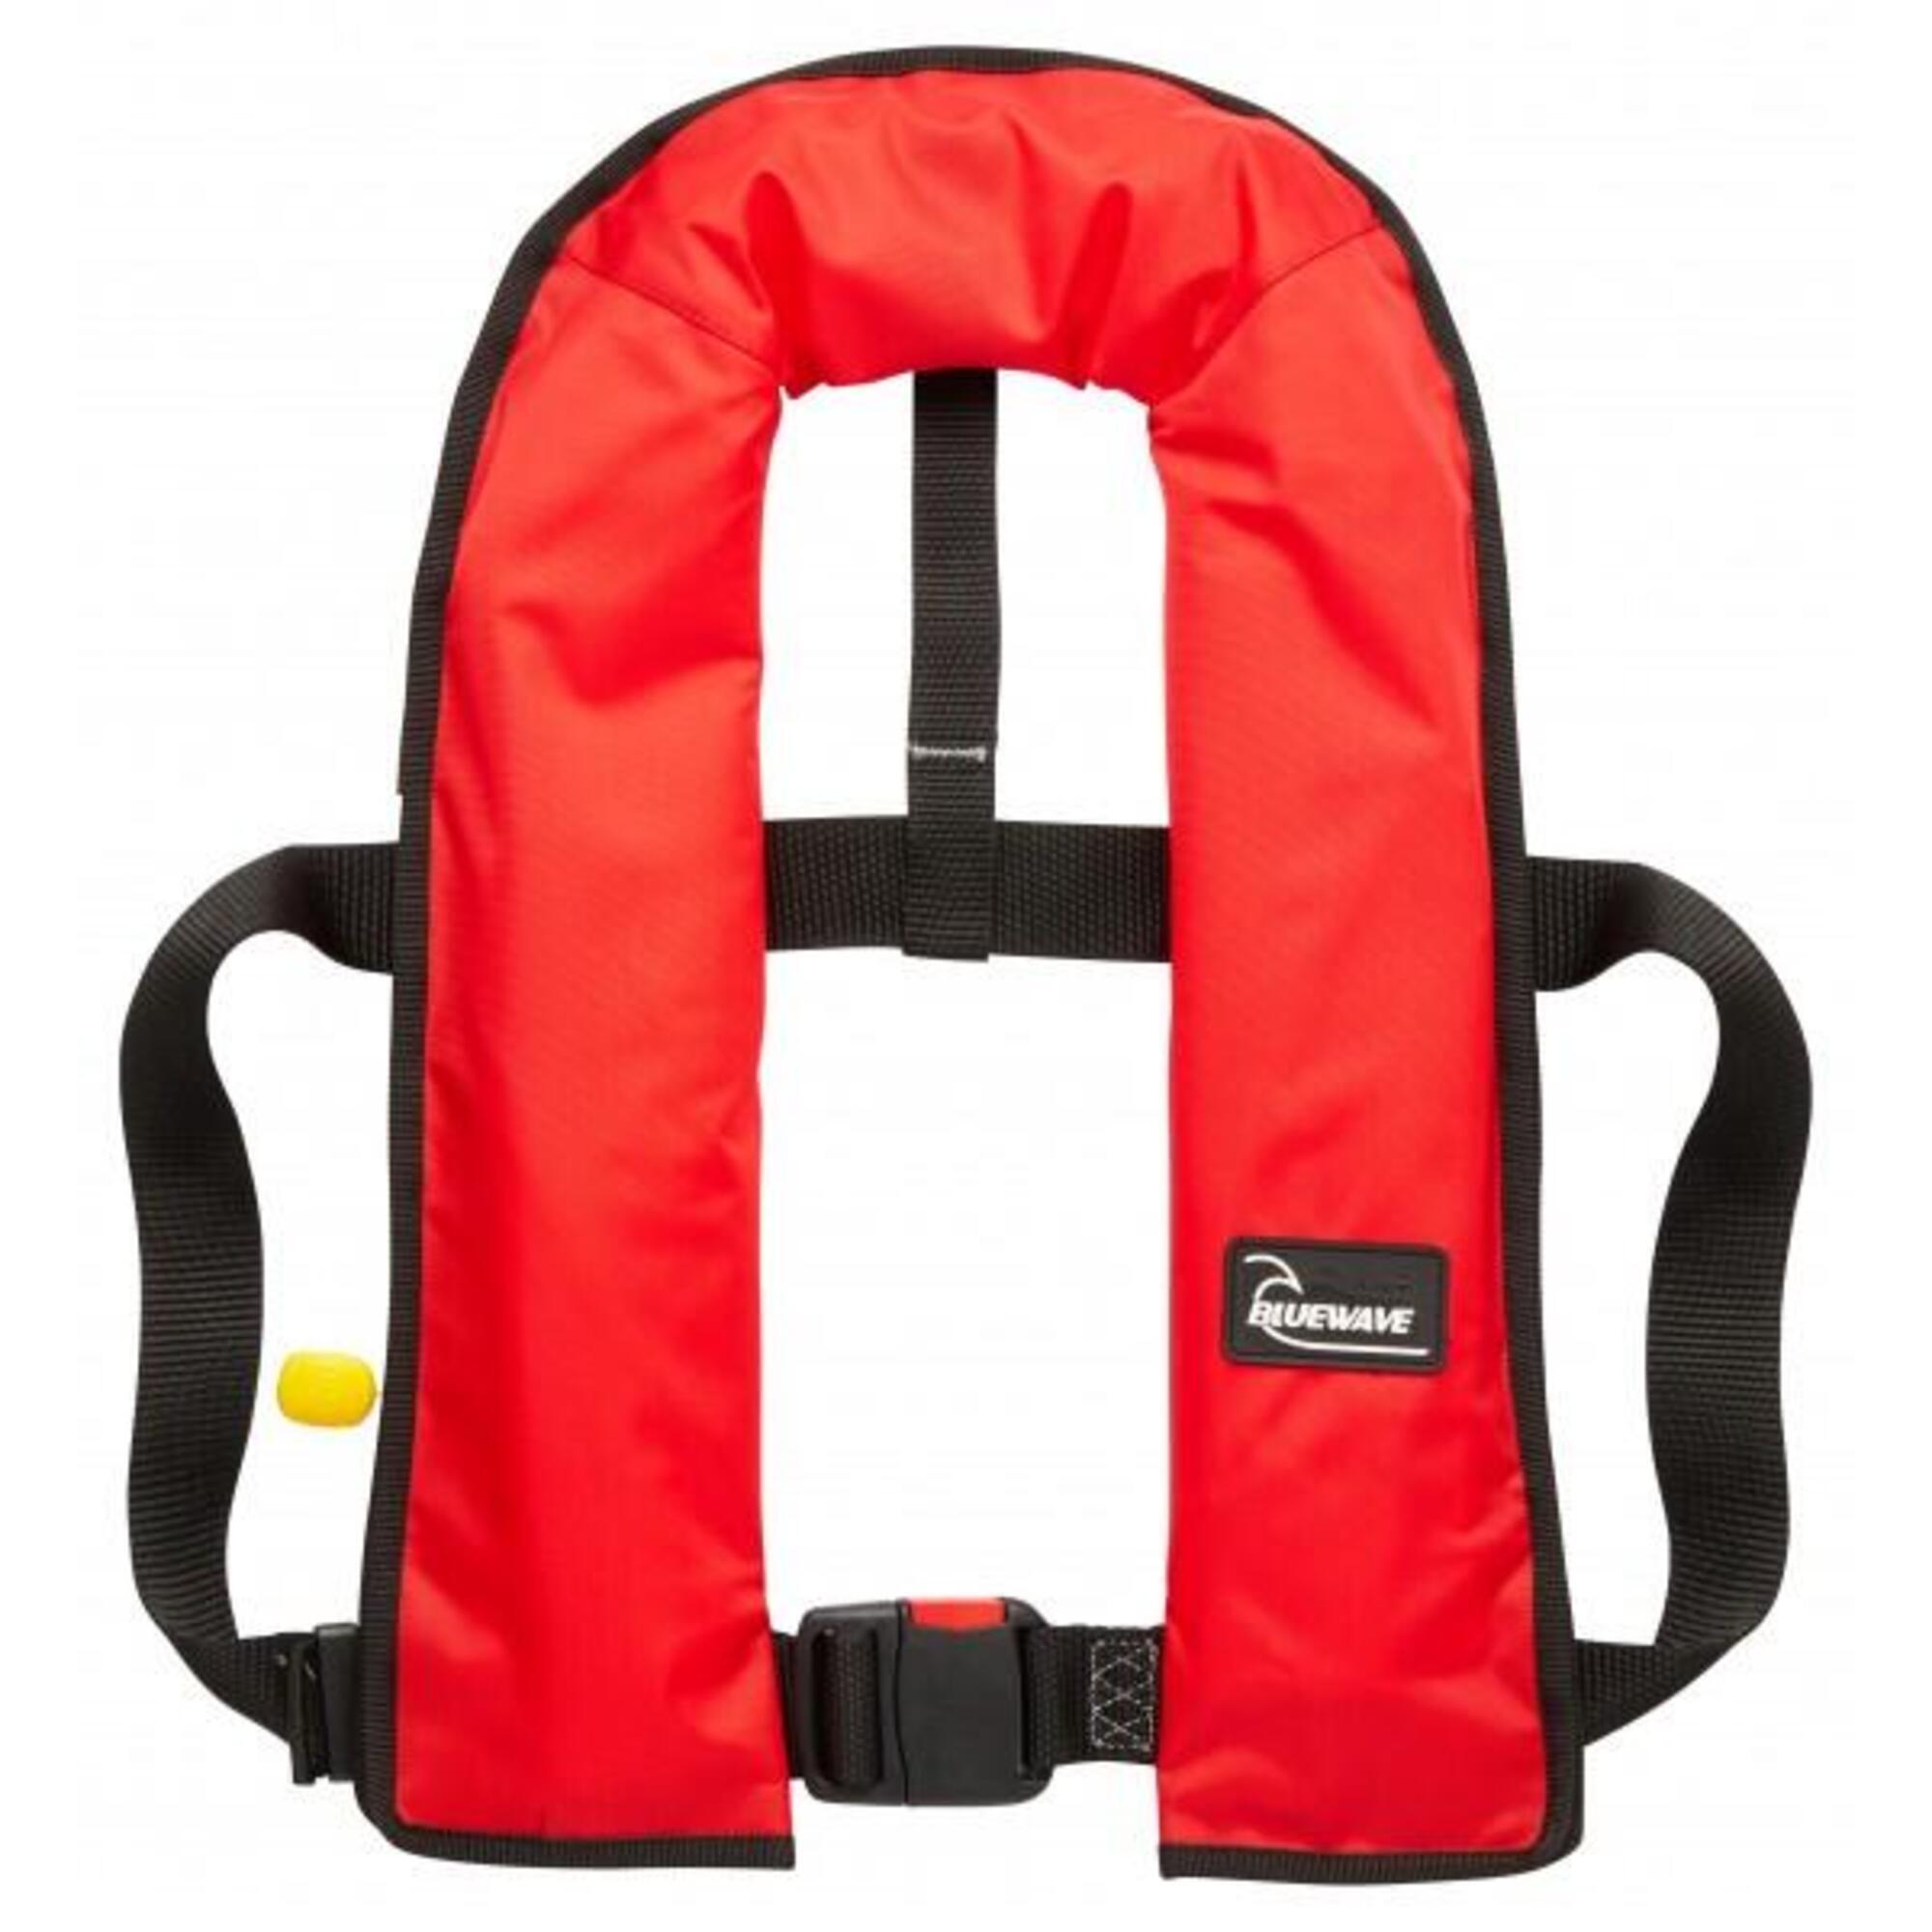 Bluewave 150N Manual 'Pull Cord to Inflate' Gas Lifejacket 1/2